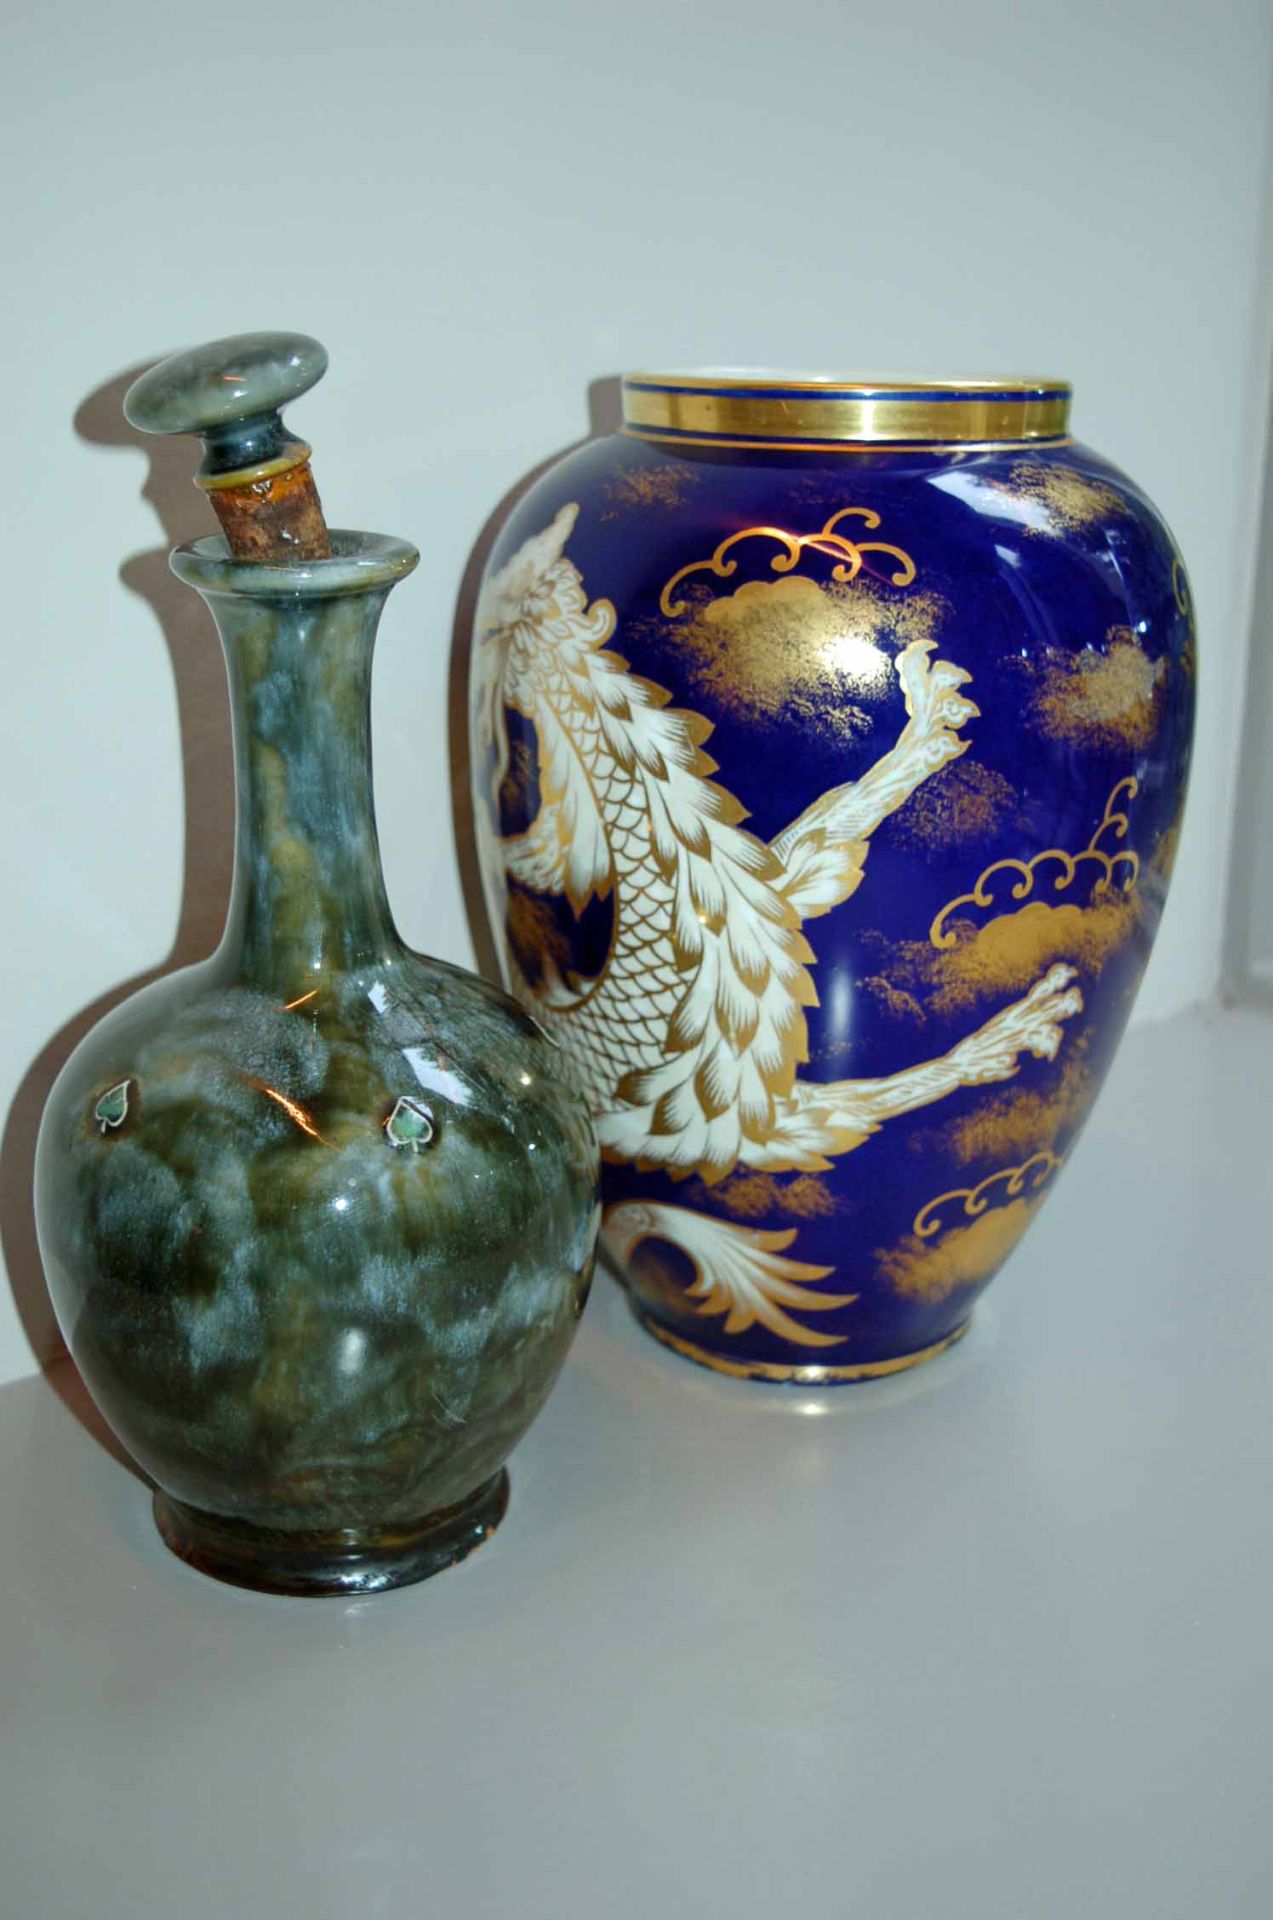 An Oriental Style Urn Shaped Vase and A ROYAL DOULTON Ceramic Decanter with Cork Stopper